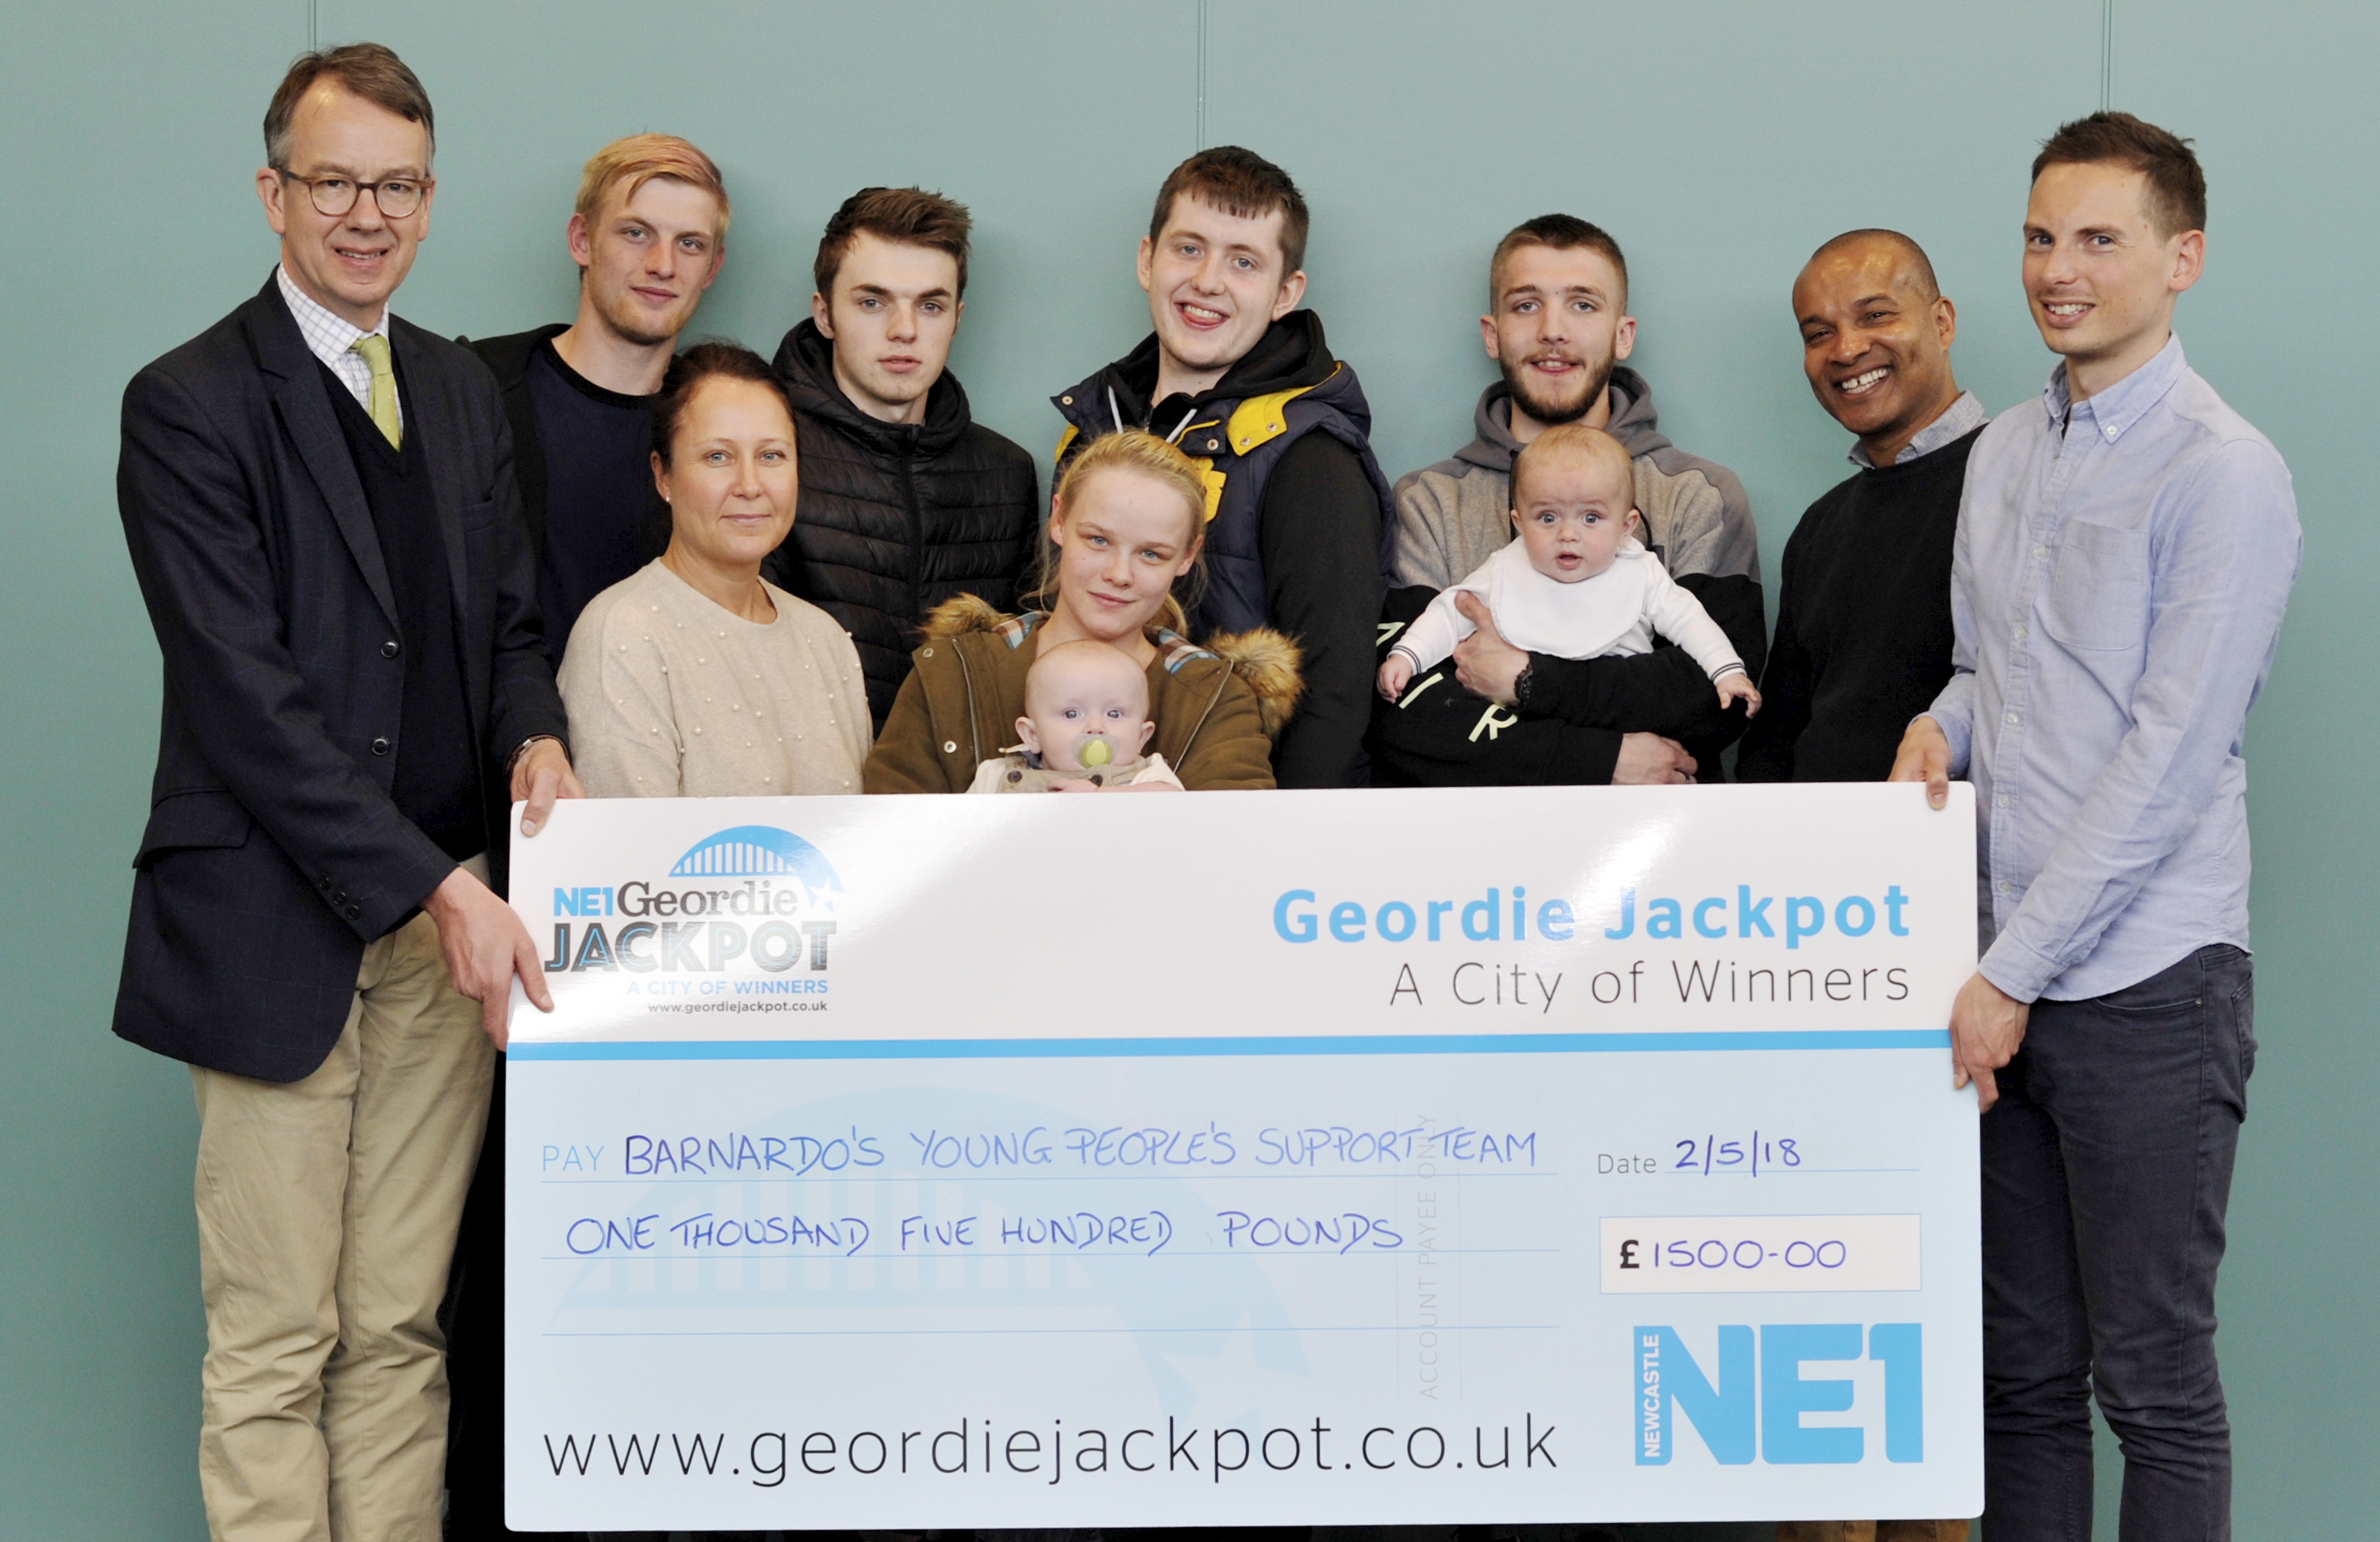 Barnardo's is the first North East charity to benefit from the Geordie Jackpot